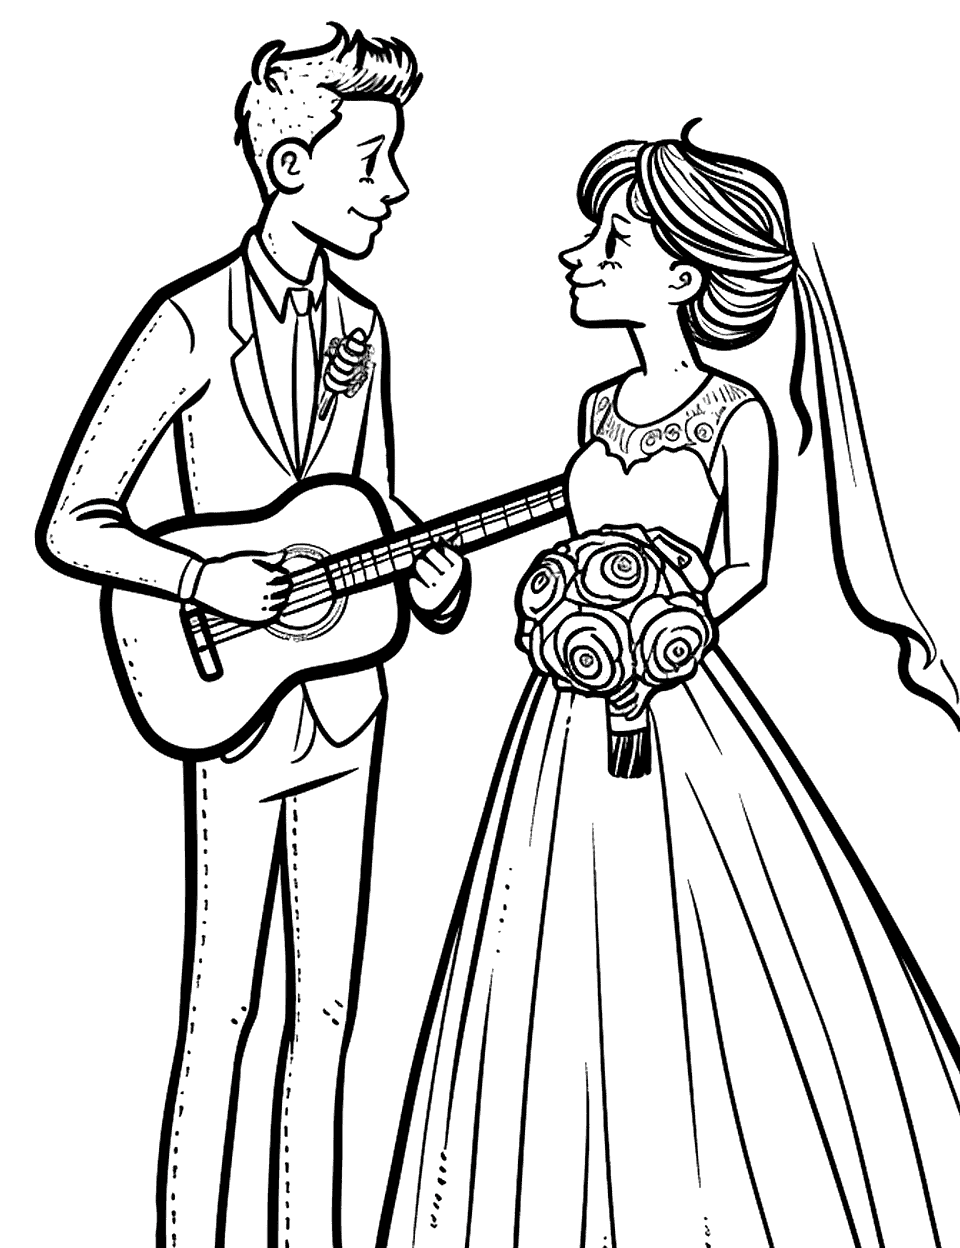 Groom Playing Guitar Wedding Coloring Page - A groom serenading his bride with a guitar at the reception.